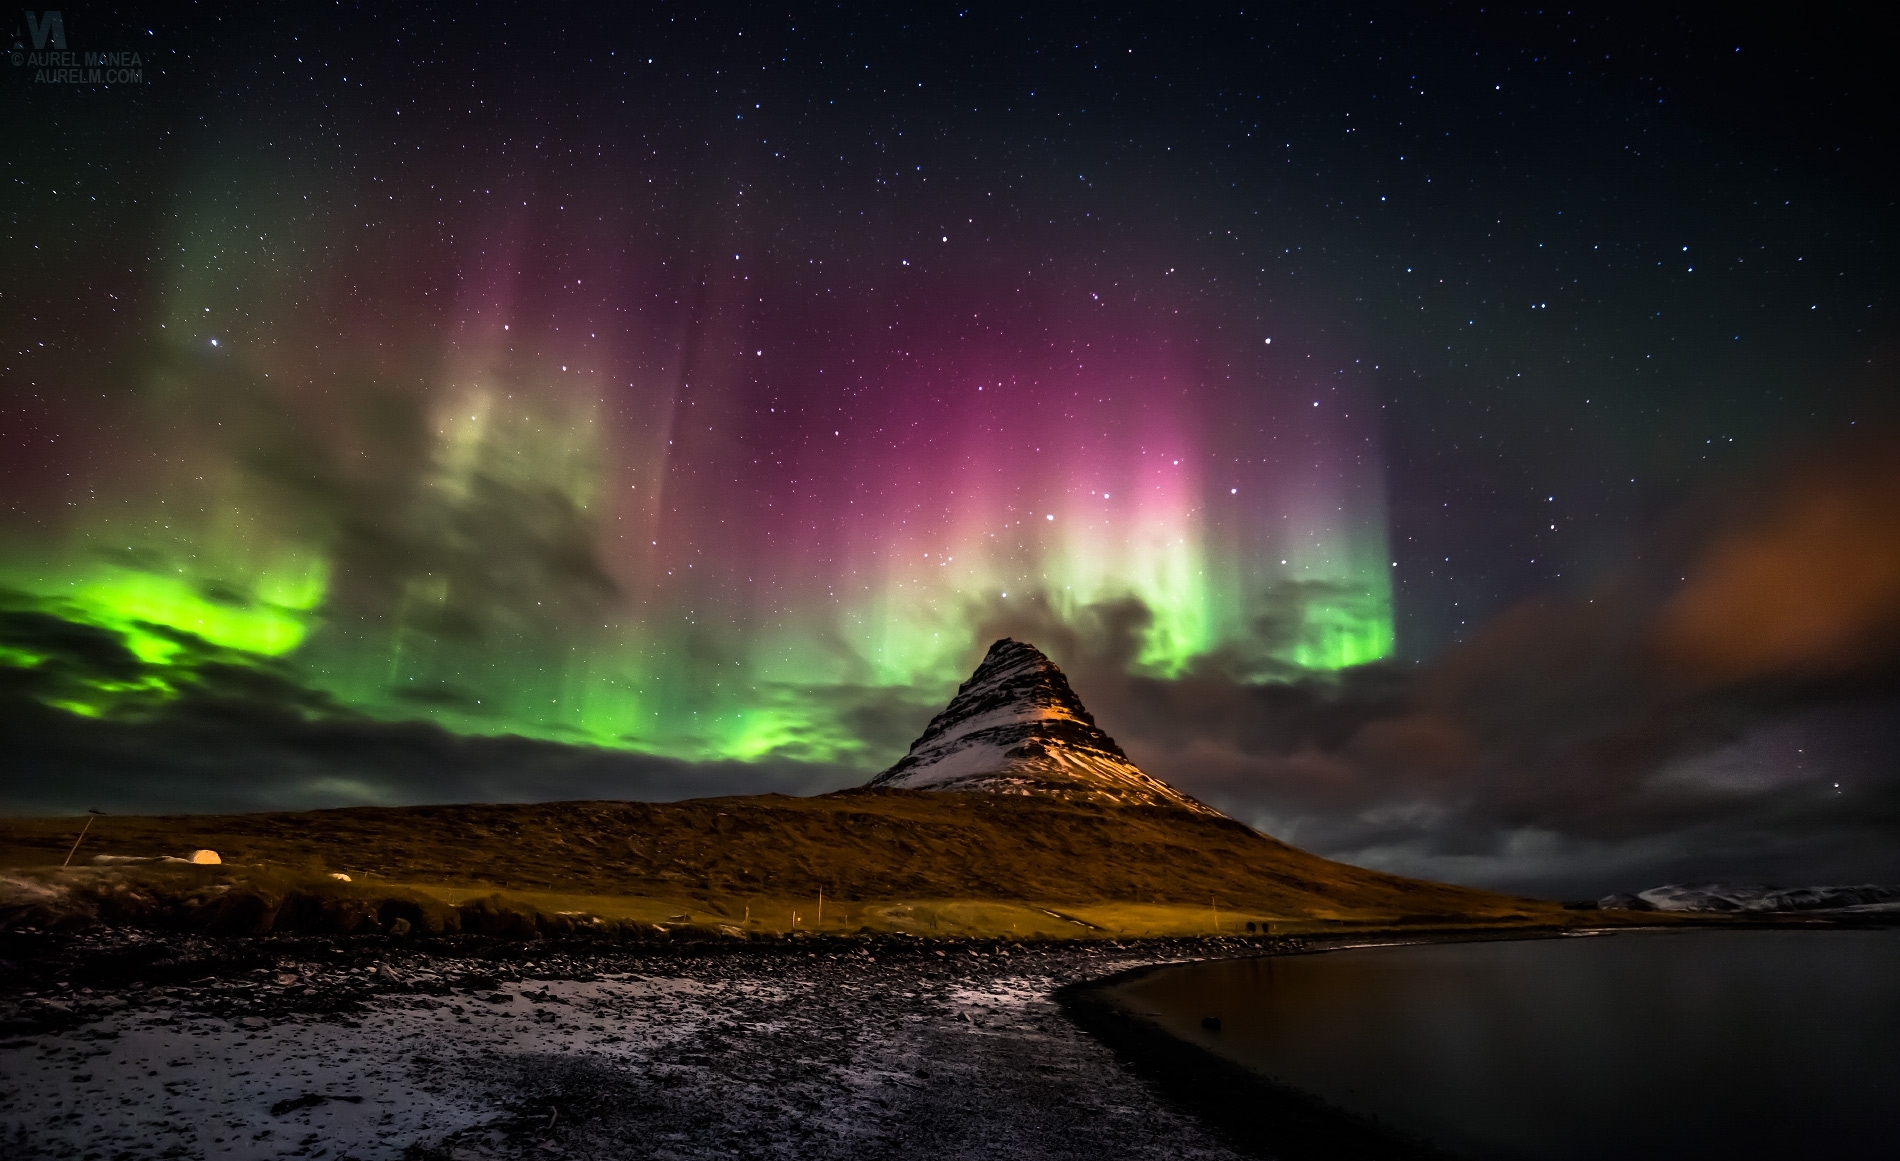 10 Best Iceland Northern Lights Wallpaper FULL HD 1920×1080 For PC Background